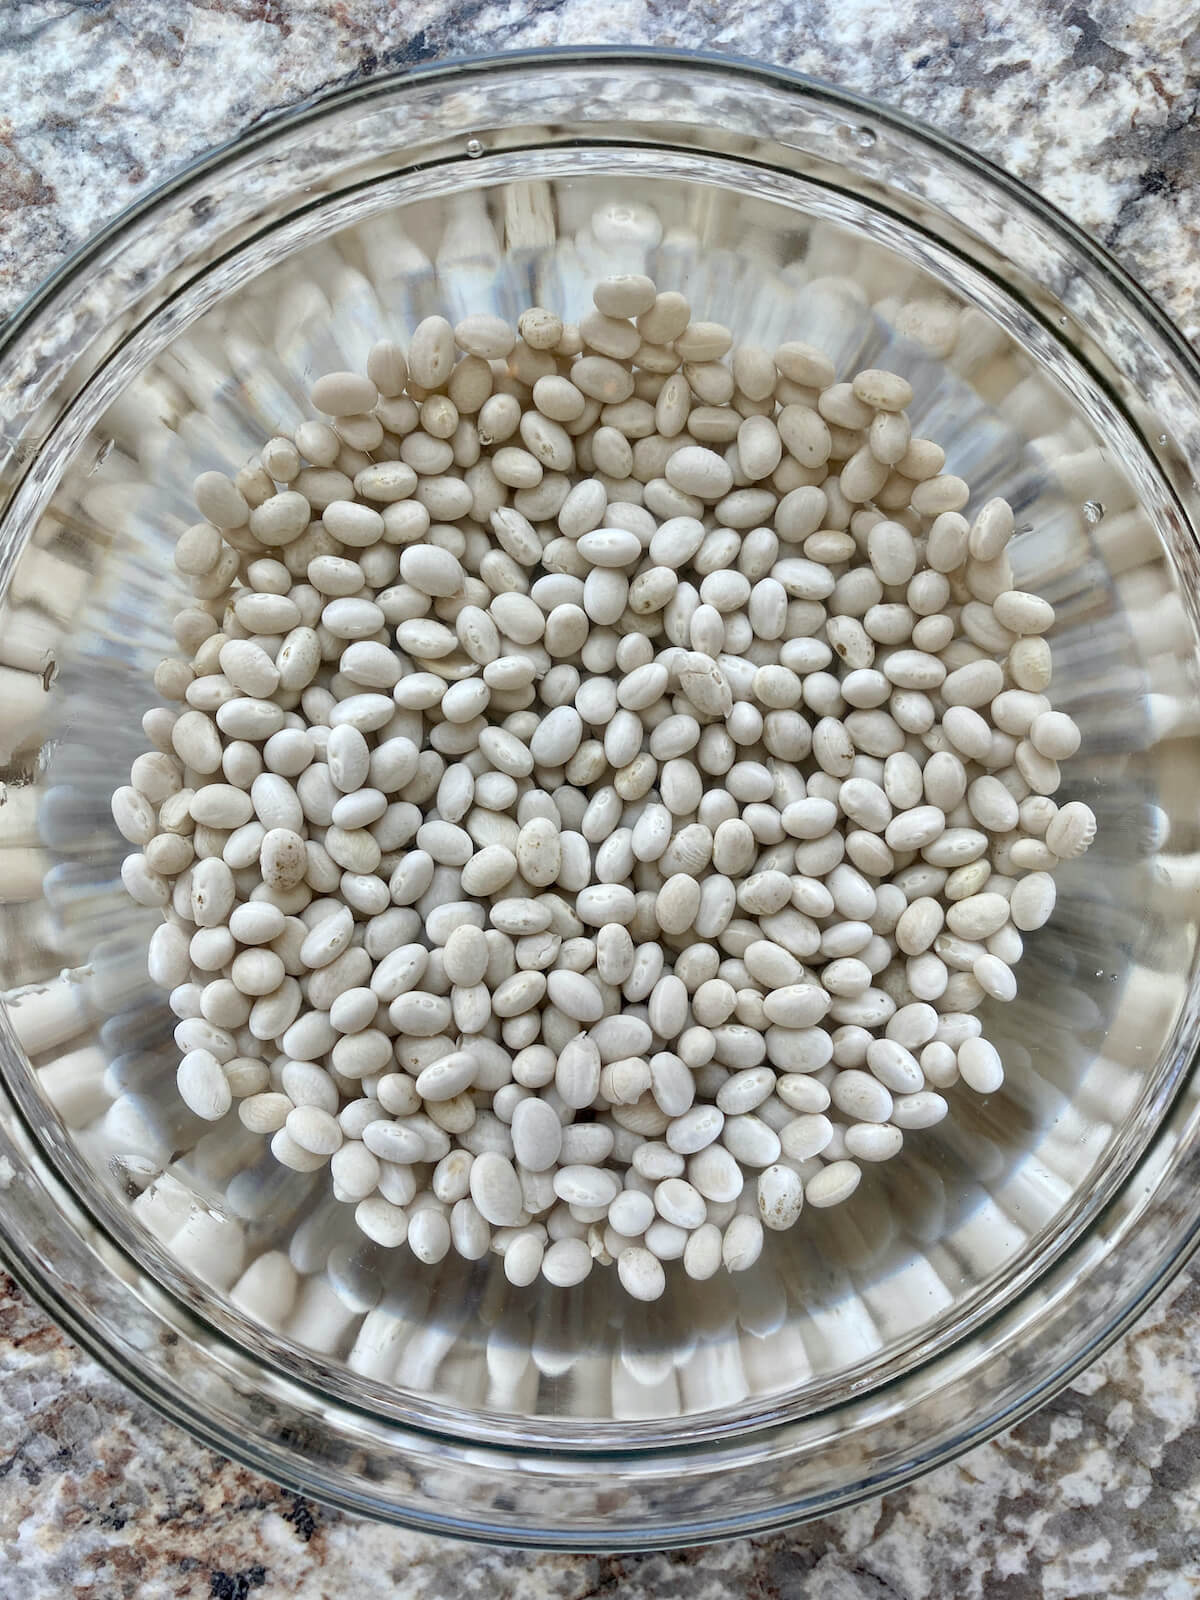 A bowl of dried navy beans soaking in water.